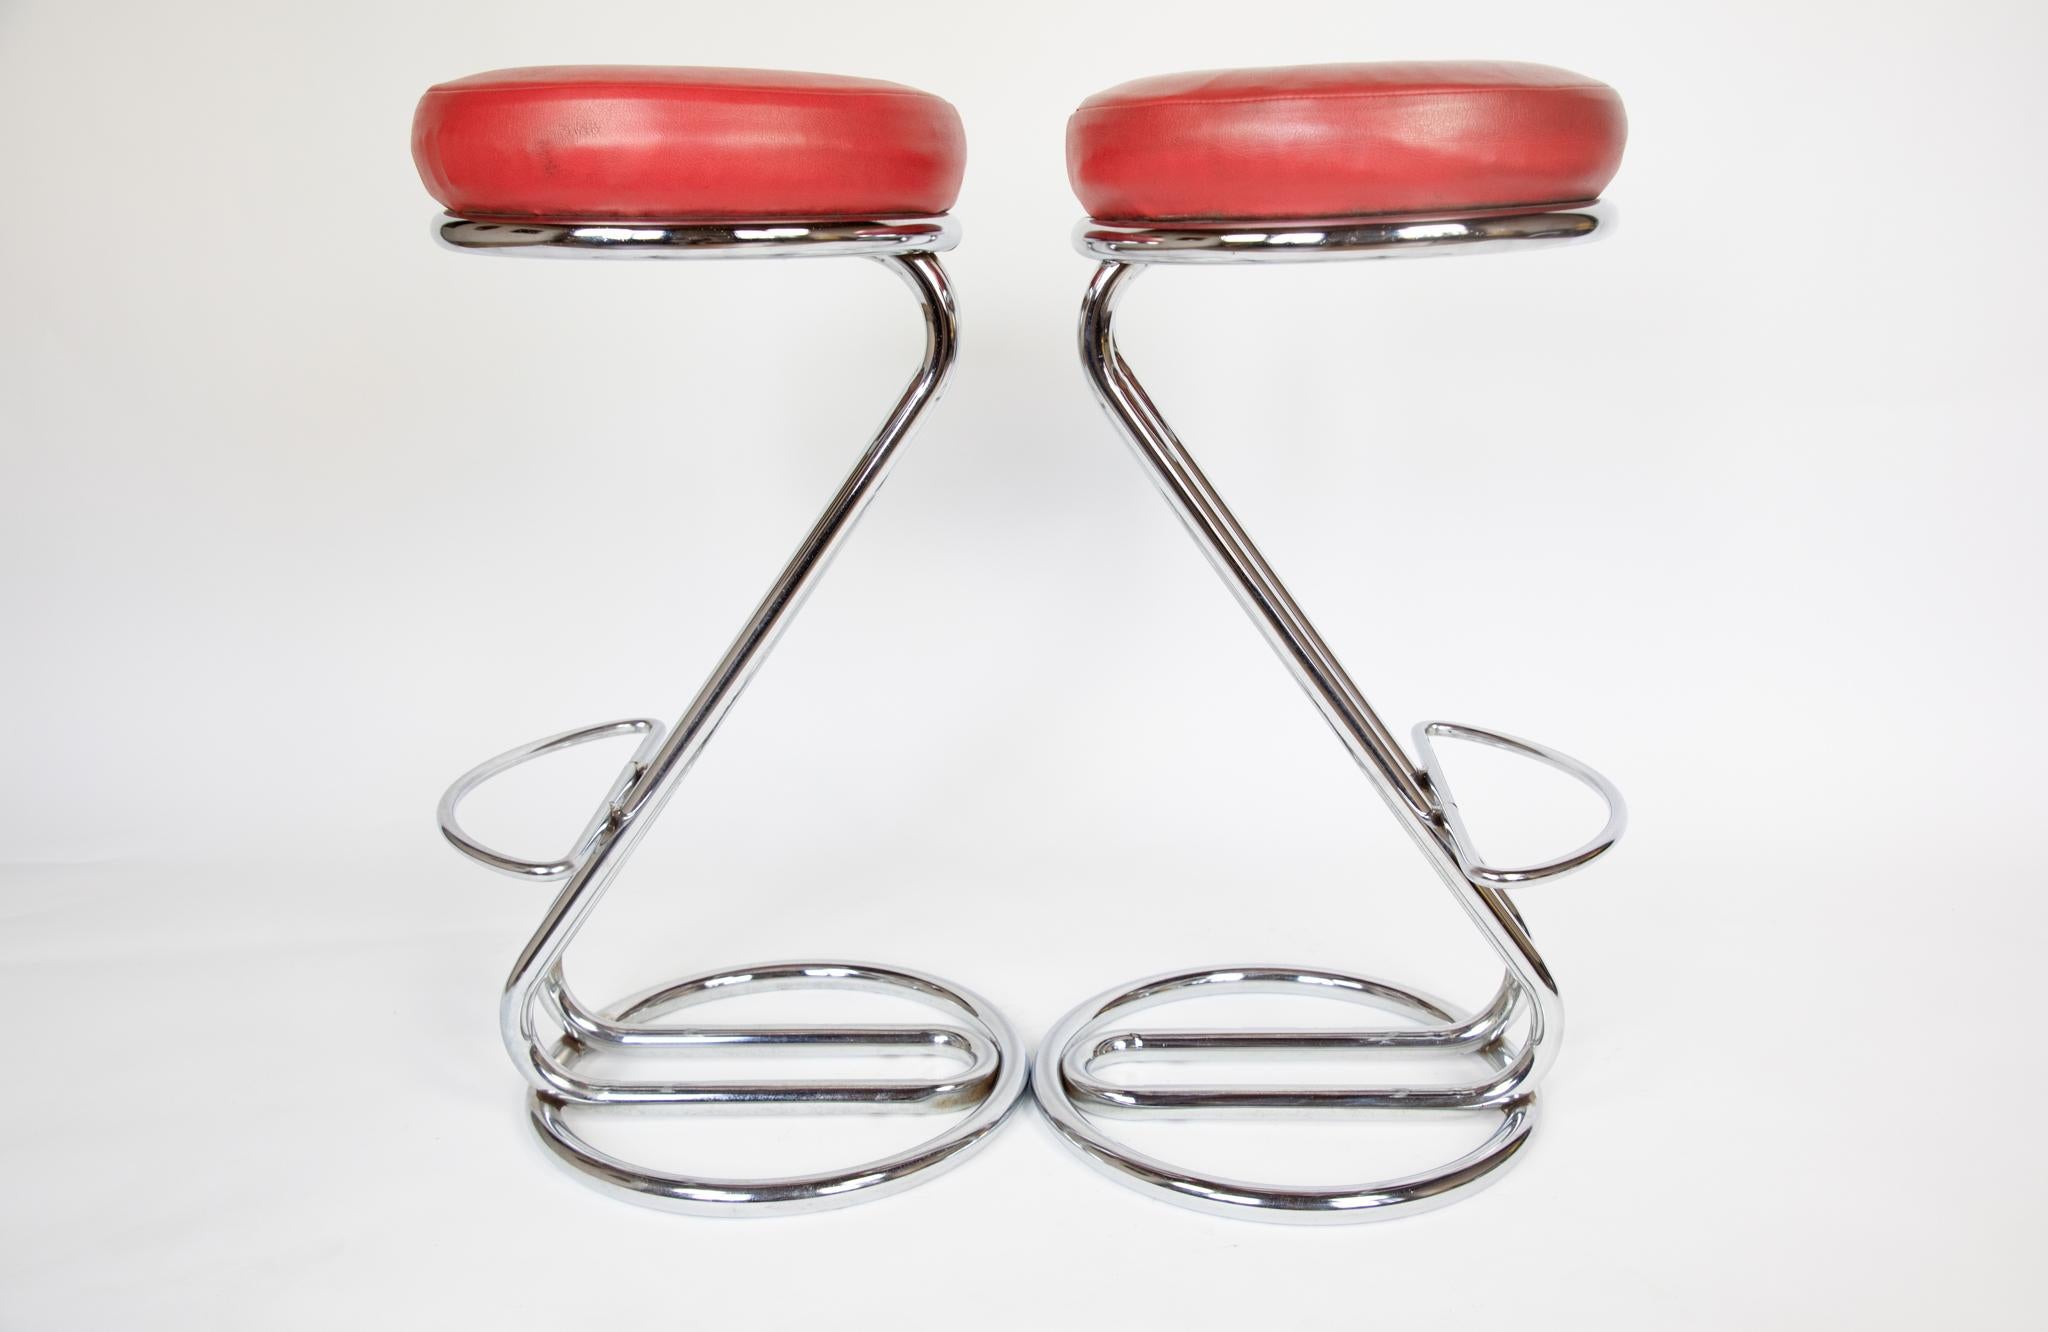 Italian Mid Century Modern  Diner Bar Stools Red Faux Leather, Chrome, Italy, 1950s